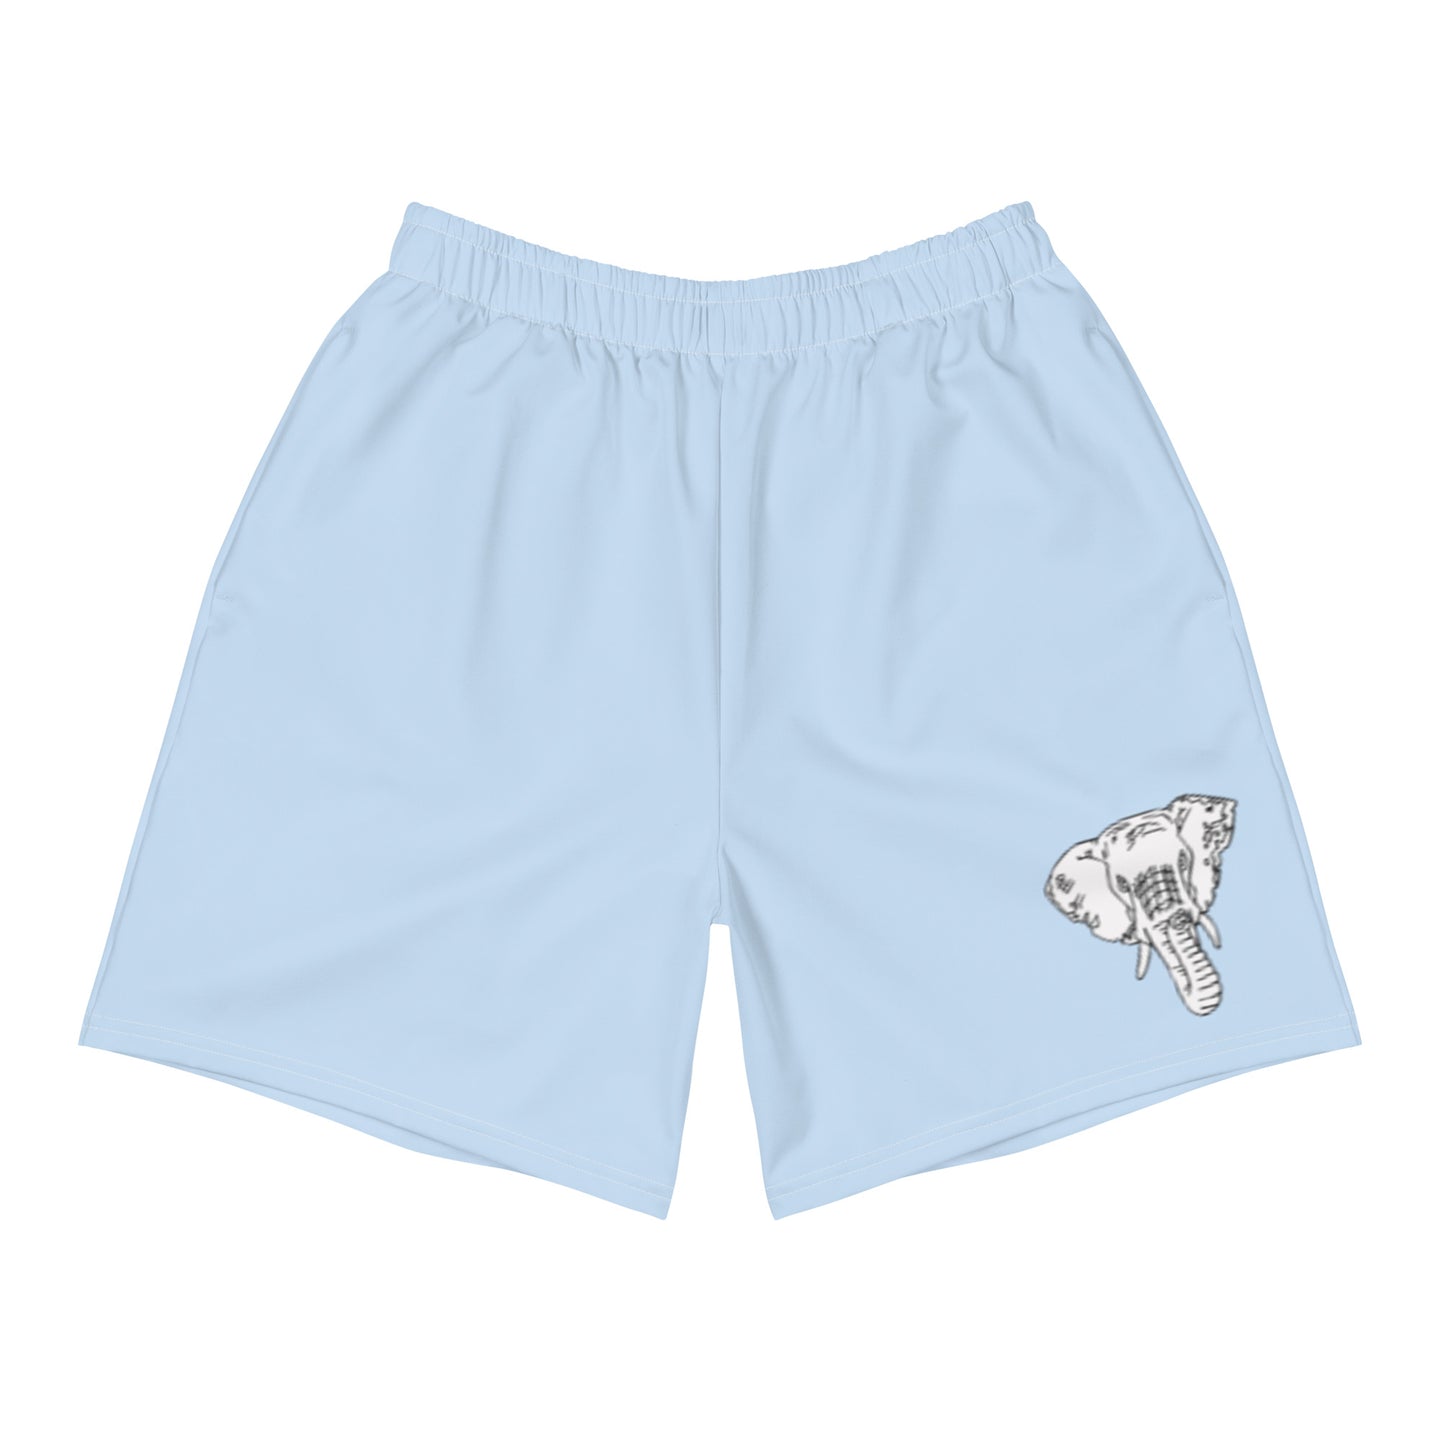 ELEPHANT IN THE ROOM ATHLETIC LONG SHORTS